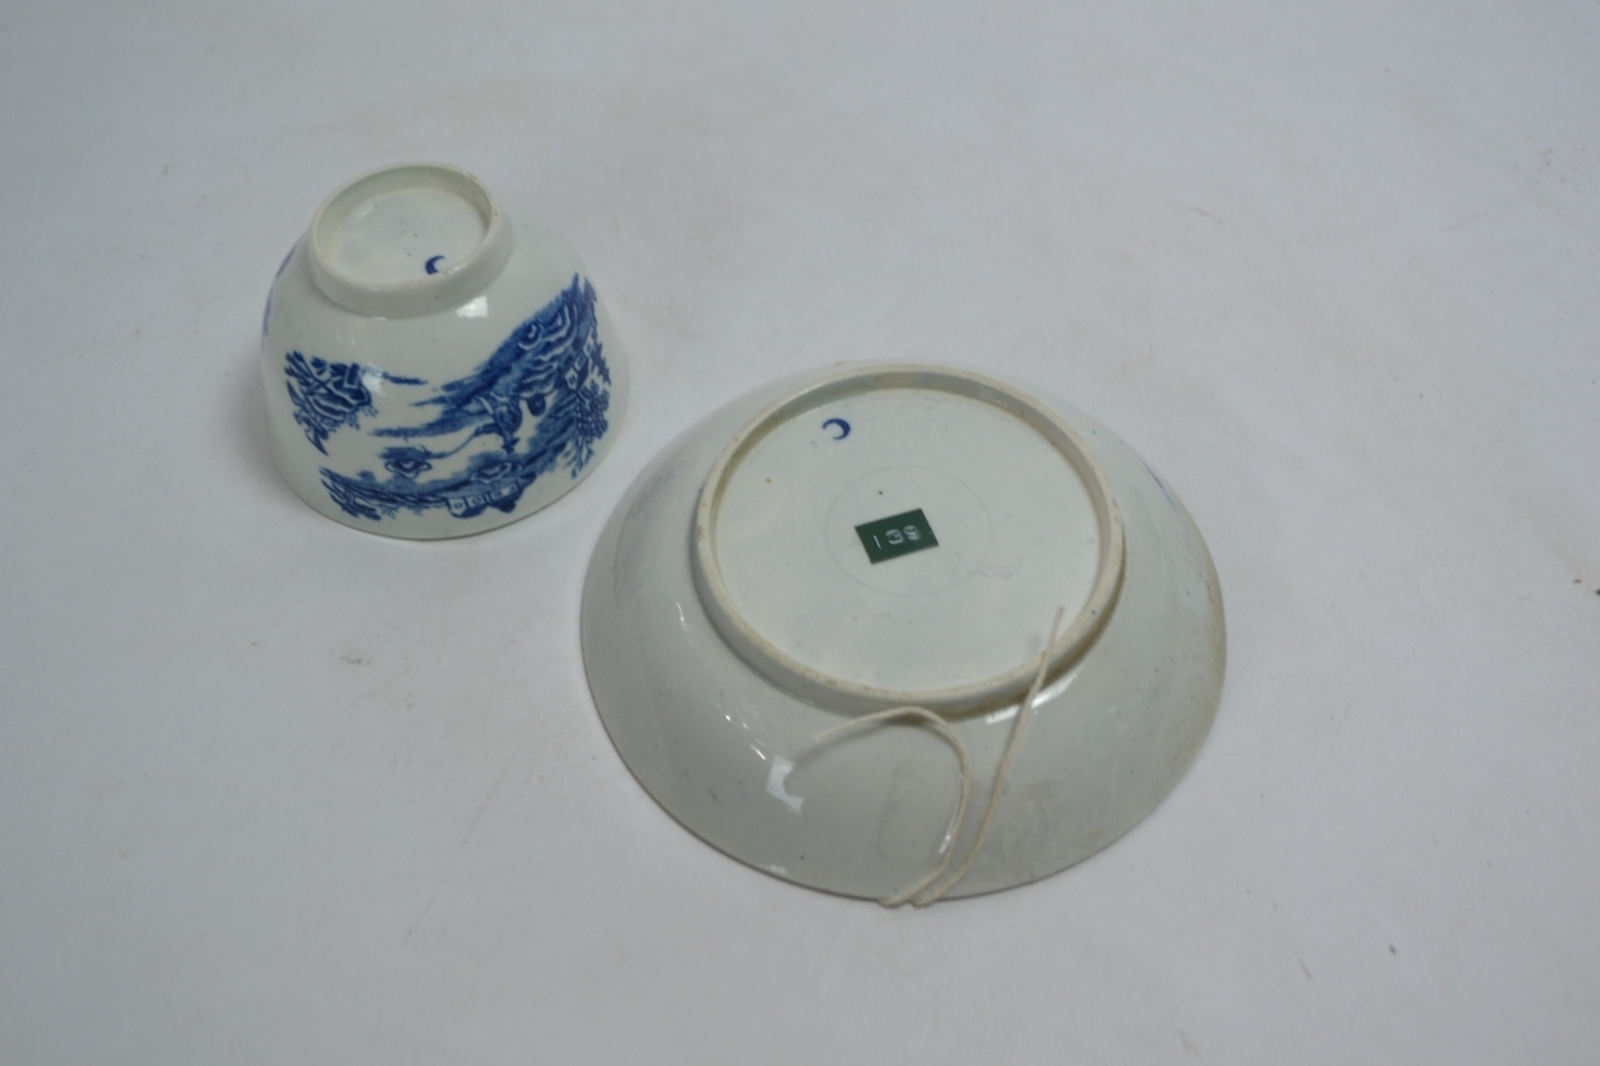 A Late 18th Century Worcester Teabowl and Saucer Decorated in the Underglaze Blue and White Fisherman and Cormorant Pattern